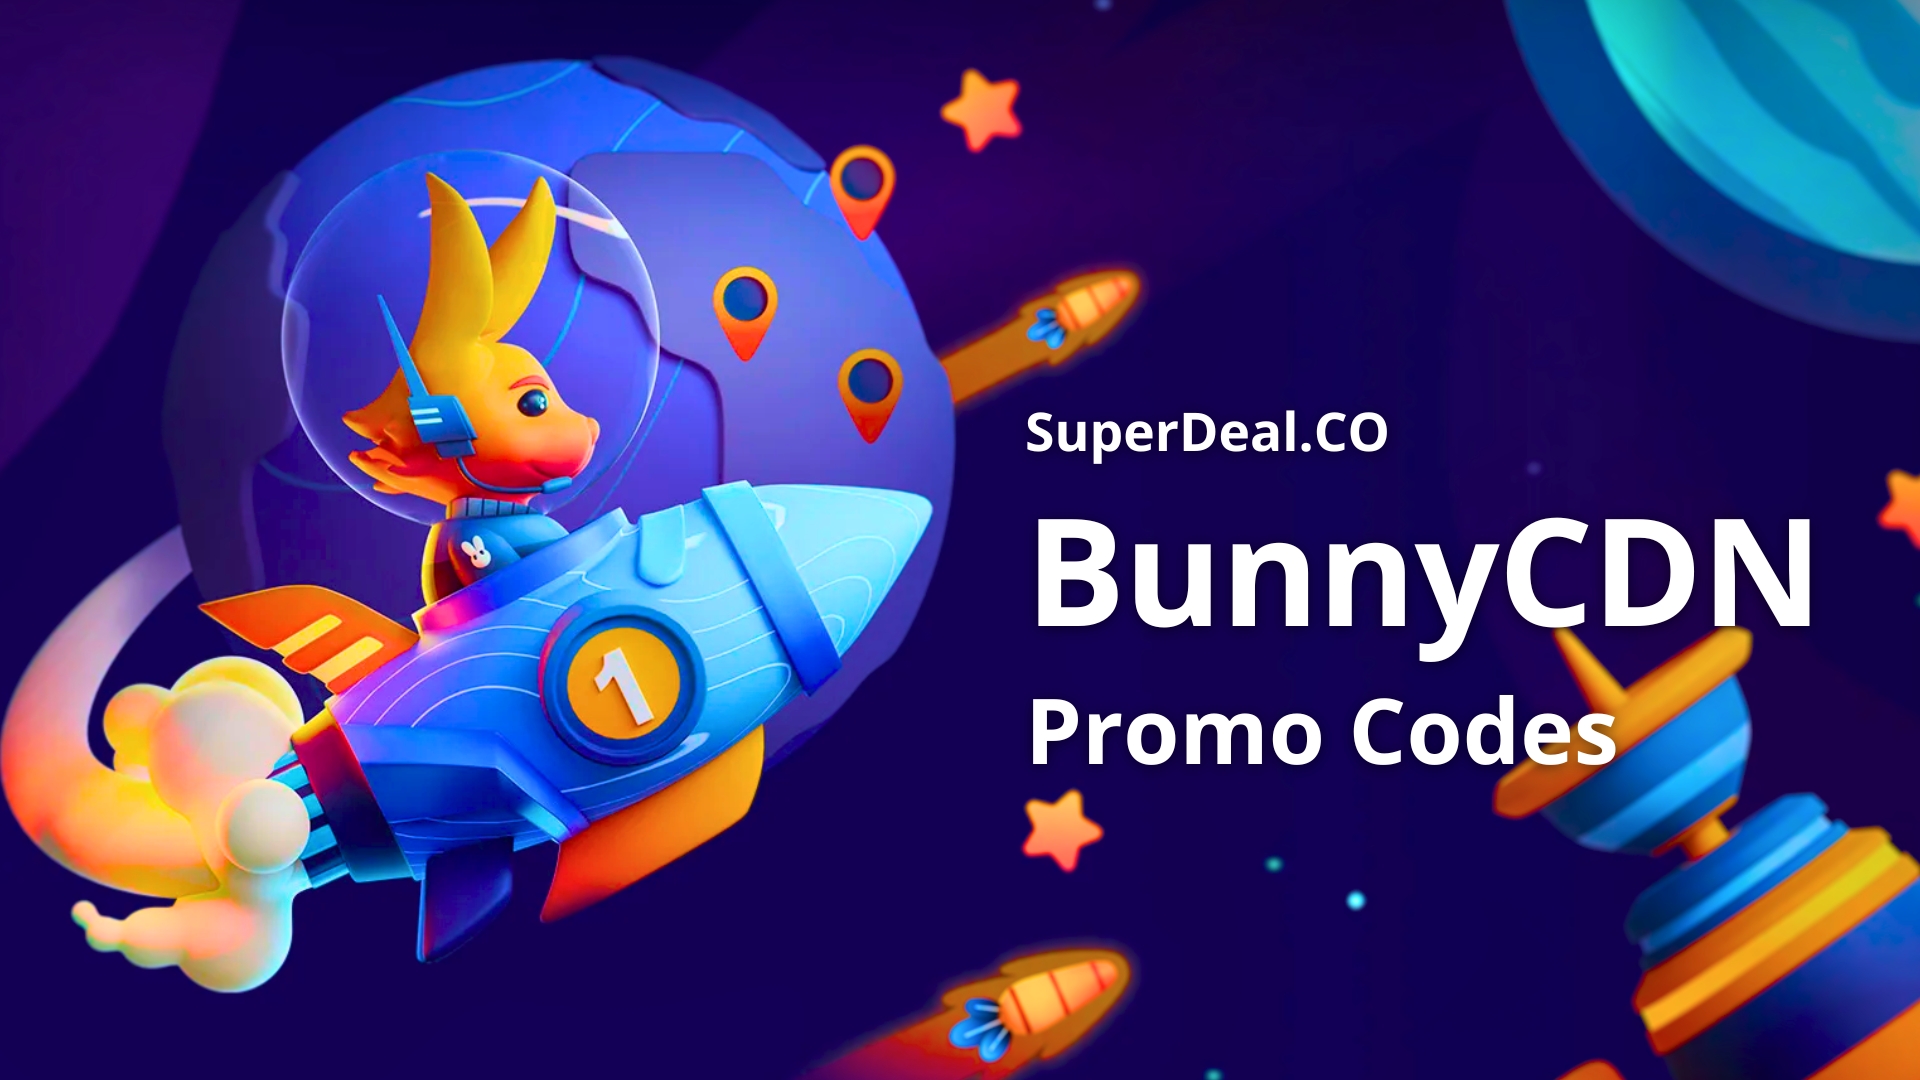 BunnyCDN Promo Code, Free Trial, Discount, Offers